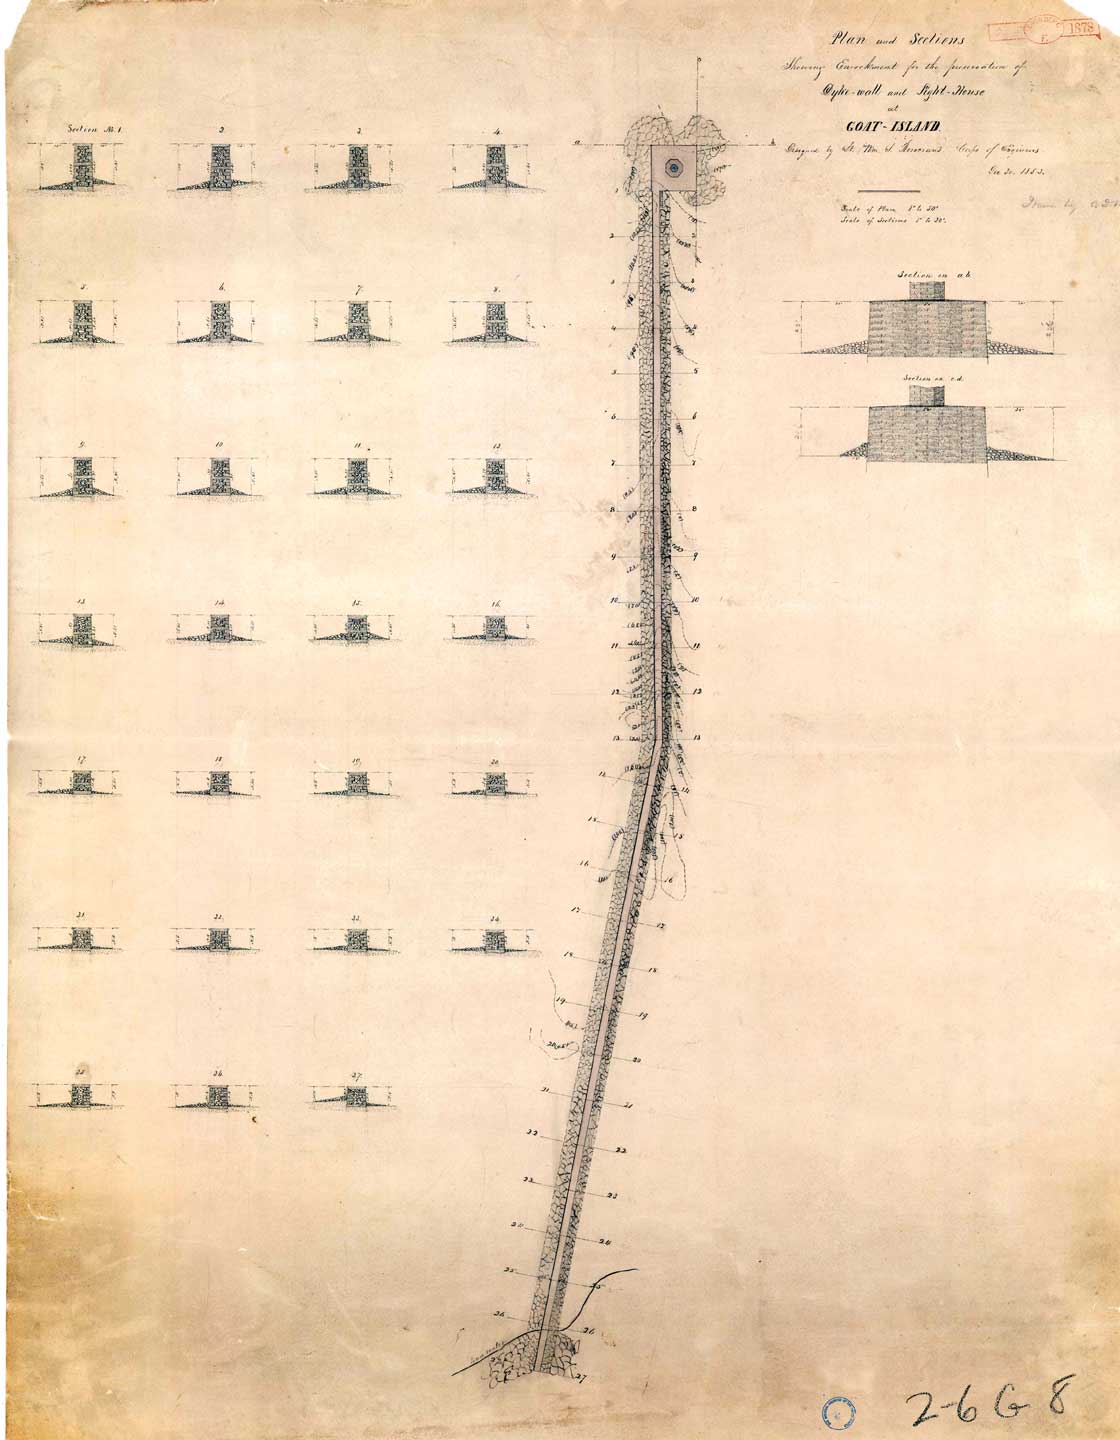  1852 Plan and Sections Showing Enrockment Dyke Wall and Lighthouse at Goat Island